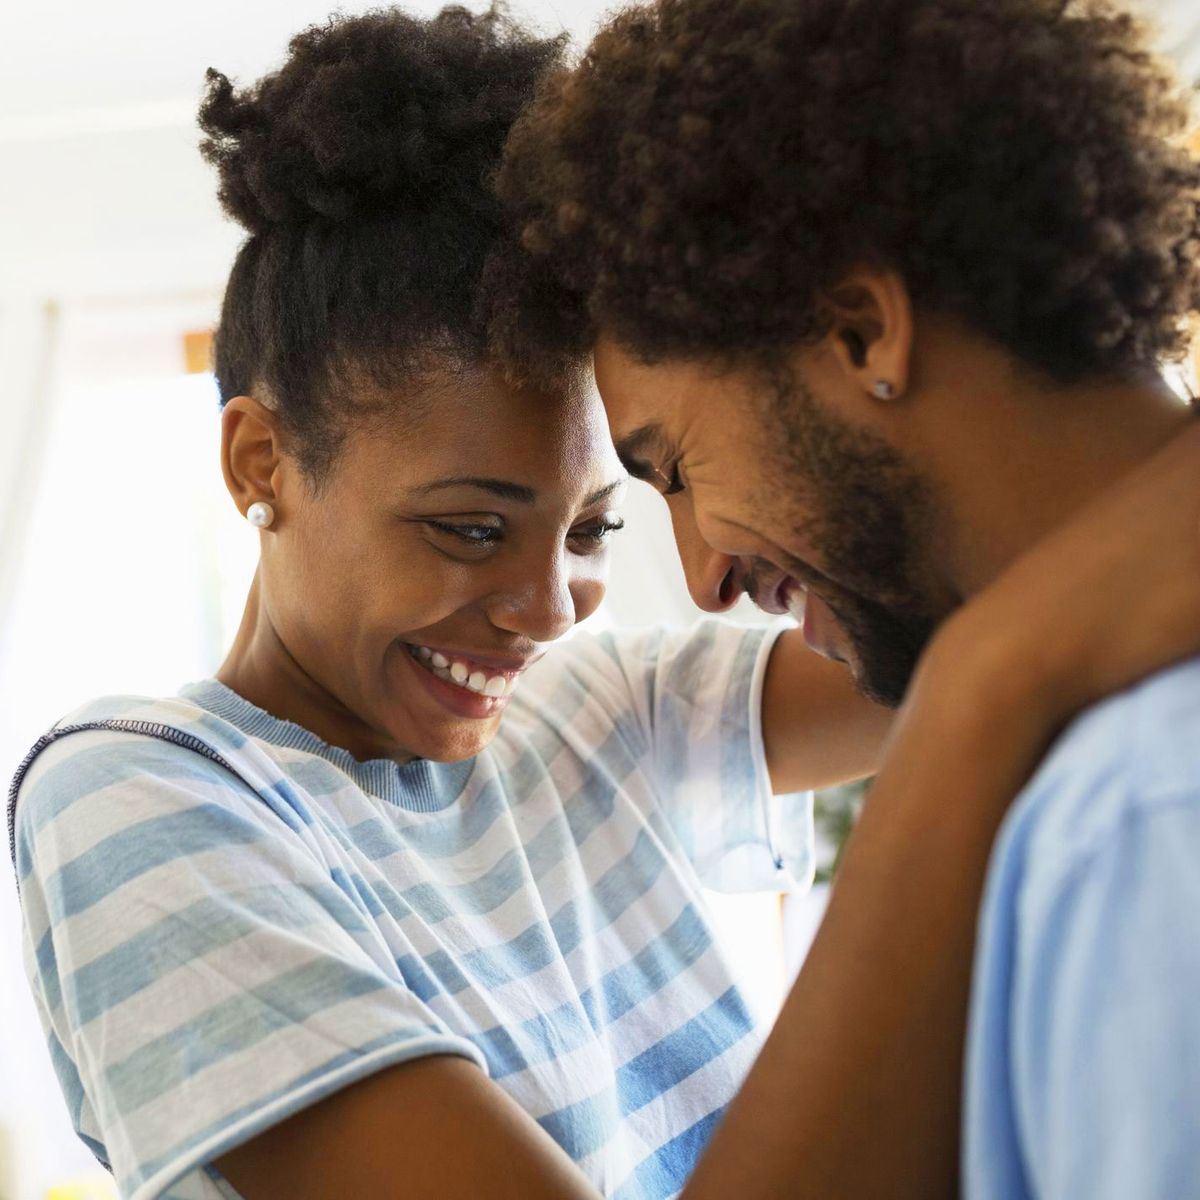 Does My Boyfriend Love Me?— 7 Undeniable Signs a Guy Loves You